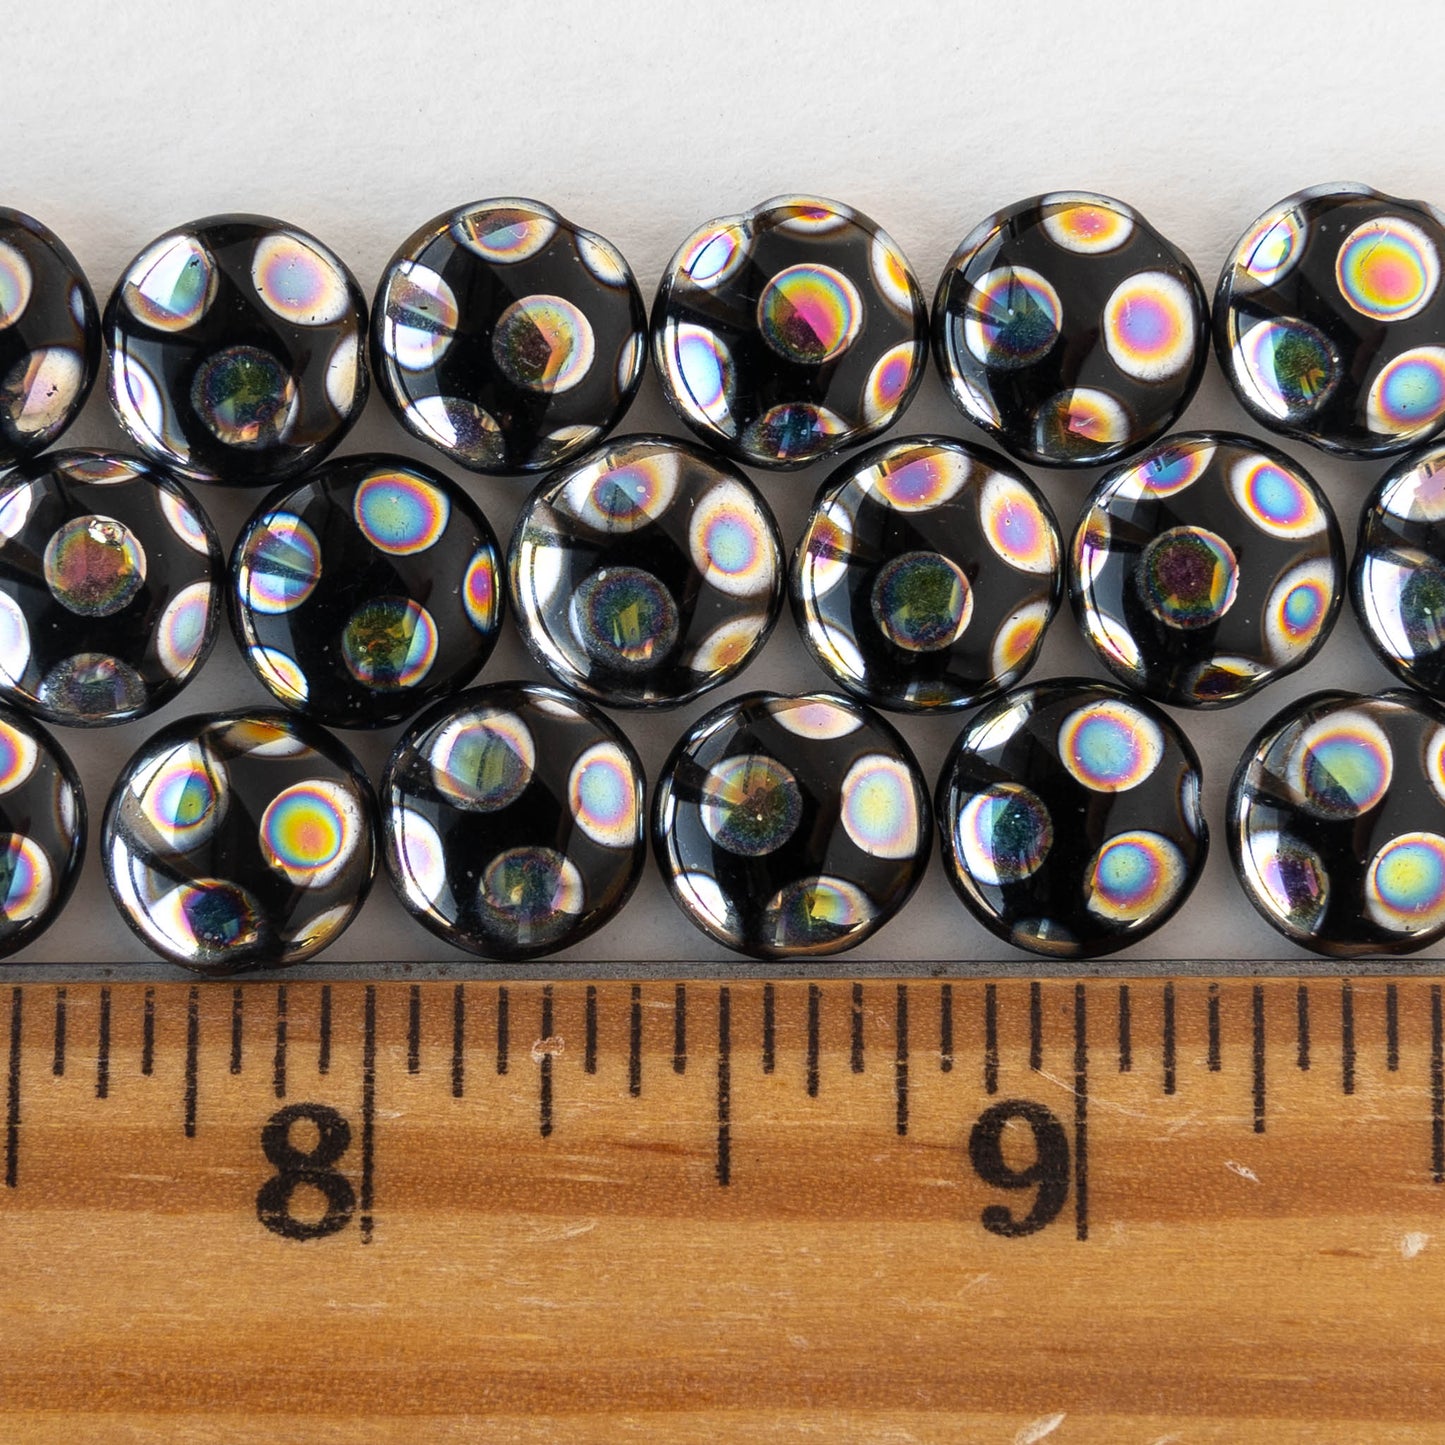 10mm Glass Coin Beads - Opaque Black Peacock - 20 beads